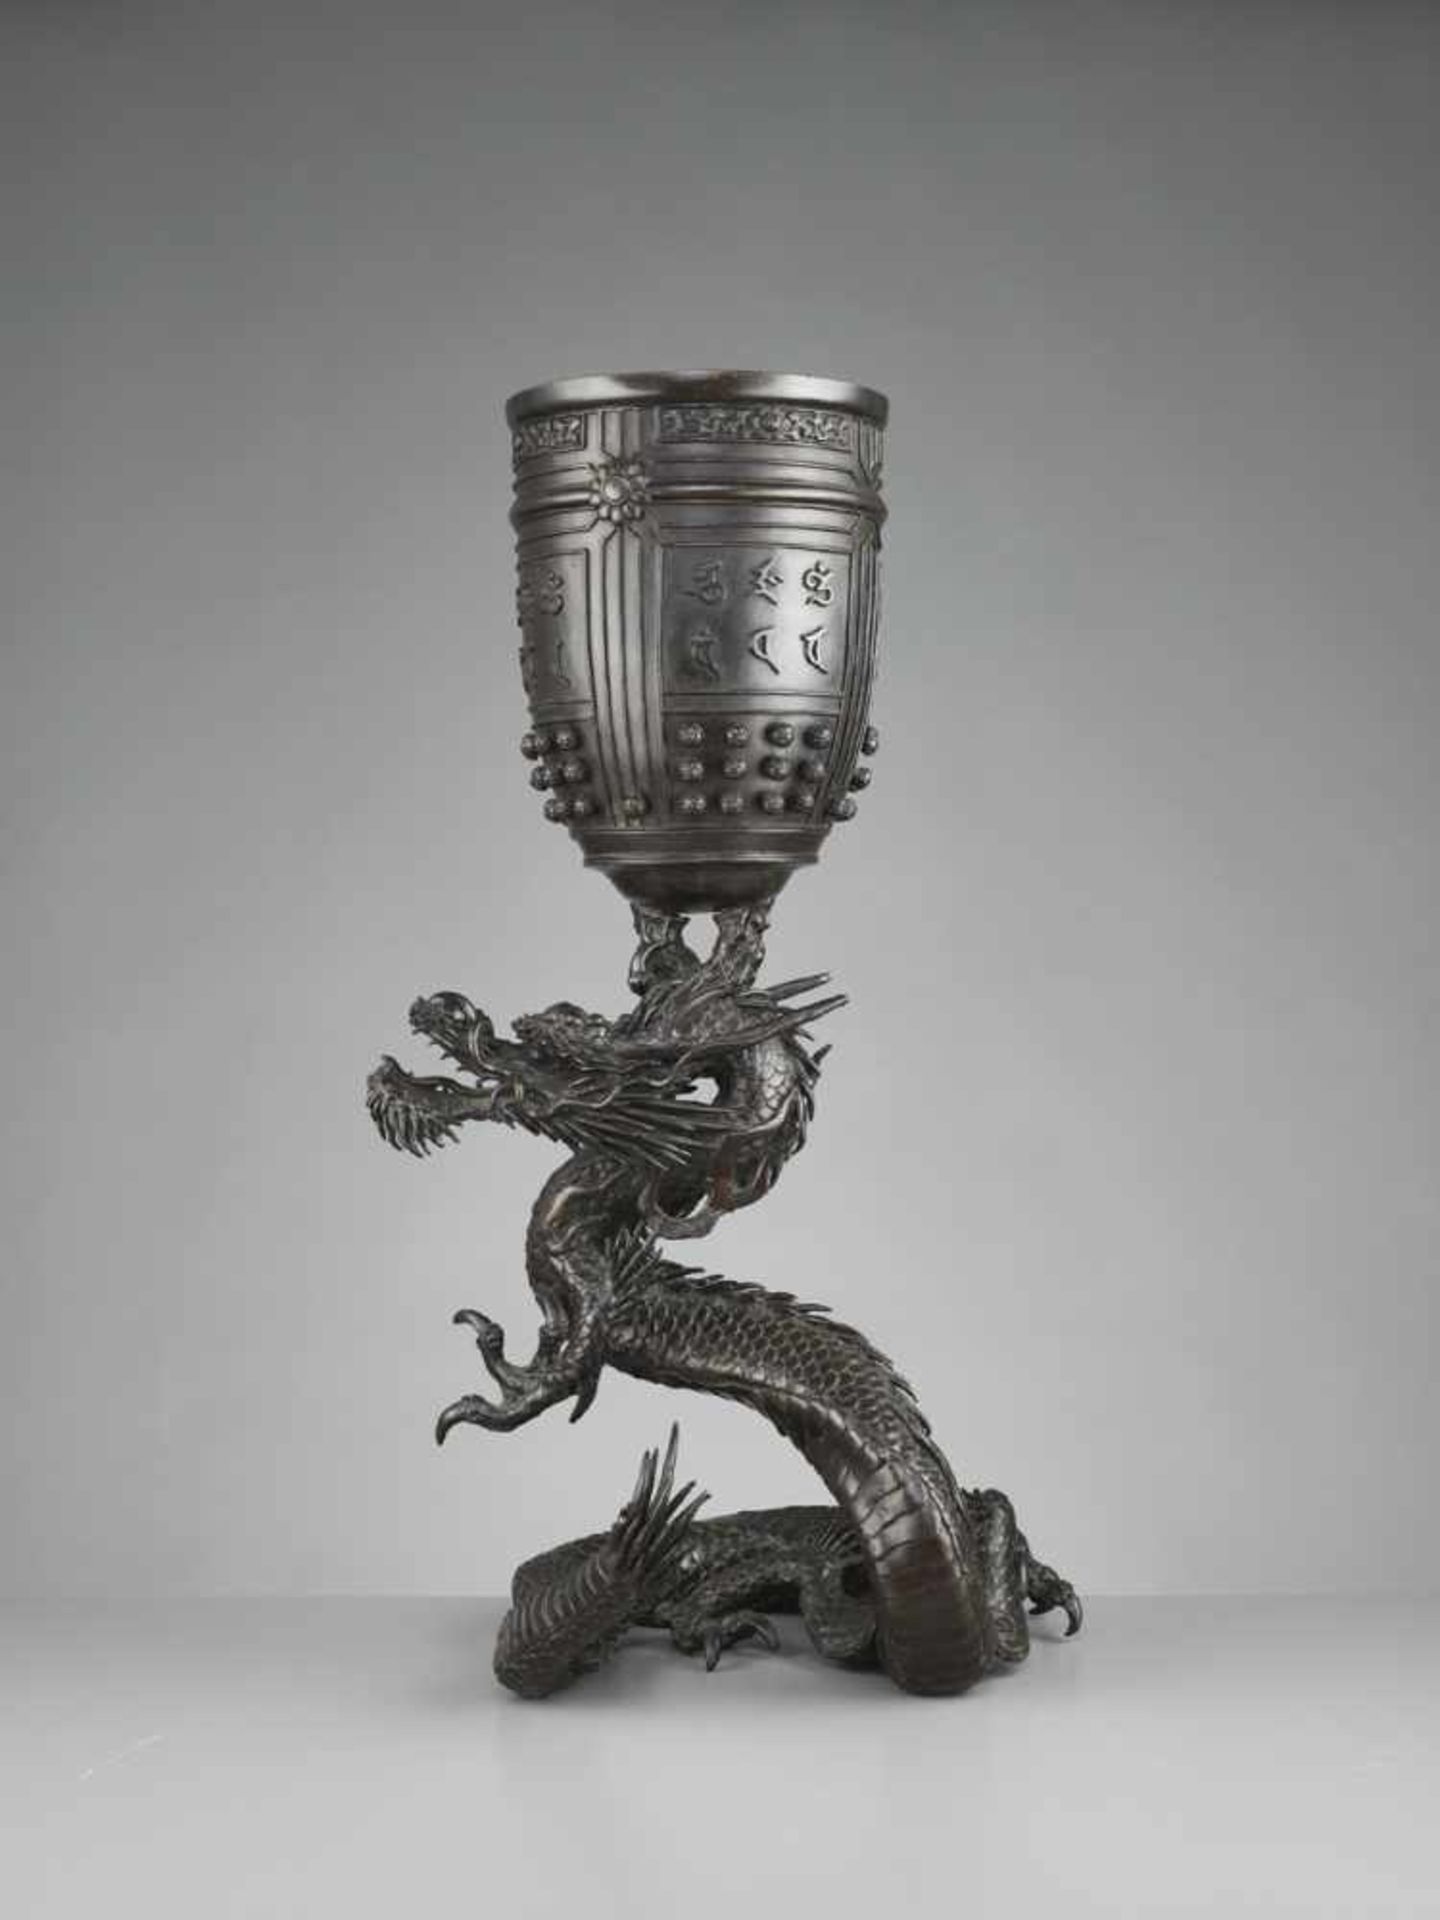 A LARGE AND MASSIVE DRAGON AND TEMPLE BELL BRONZE Japan, 19th century, late Edo period (1615-1868) - Image 3 of 10